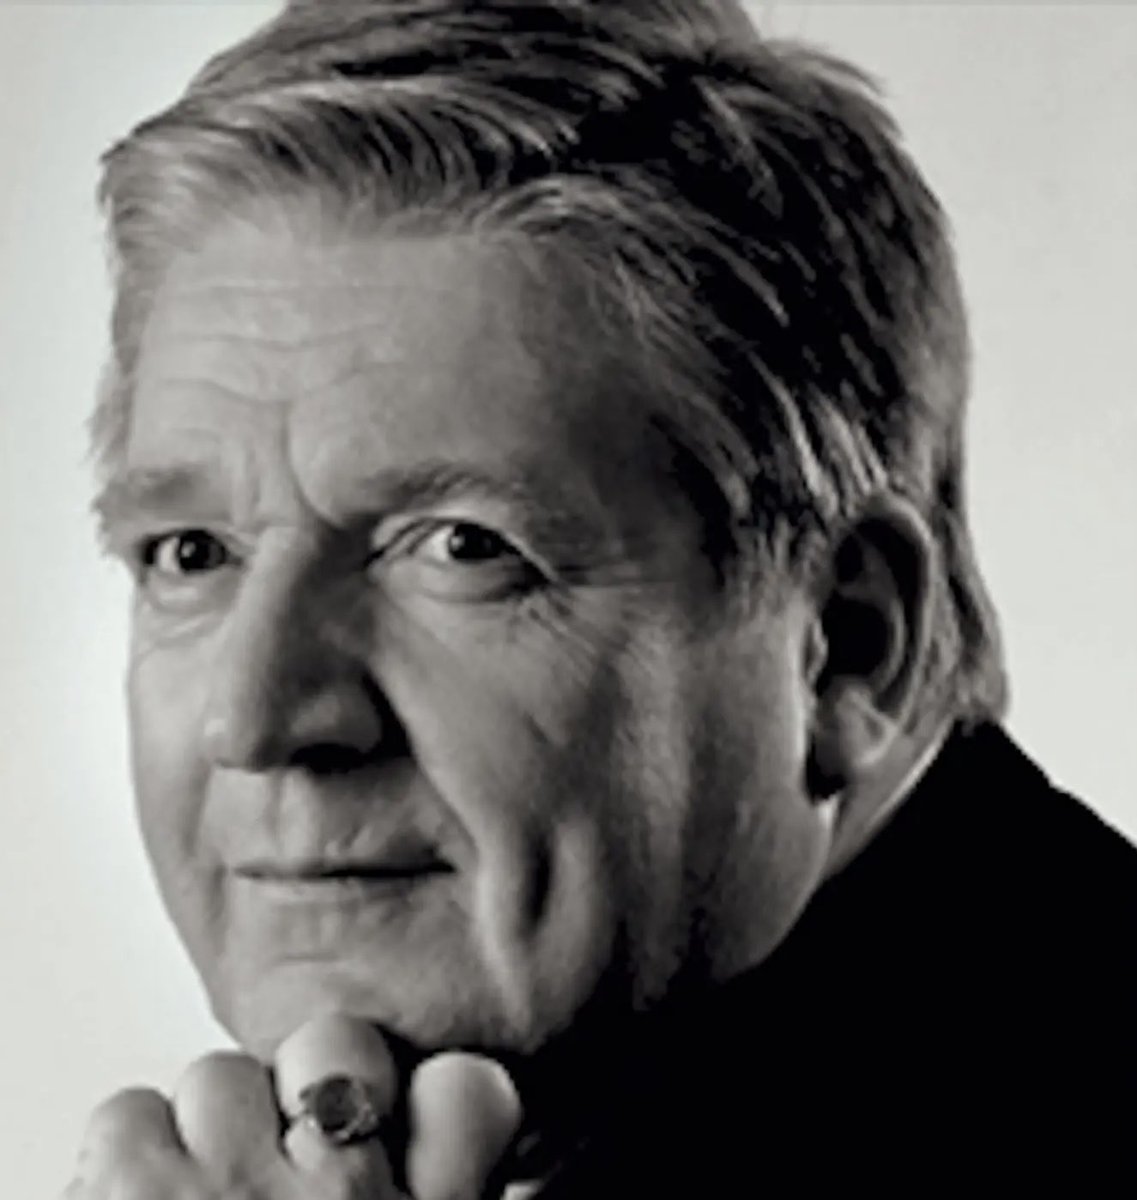 Sad news of the death of the Icelandic tenor Jón Þorsteinsson, for many years a stalwart of the Dutch opera scene, in Iceland at the age of 73.